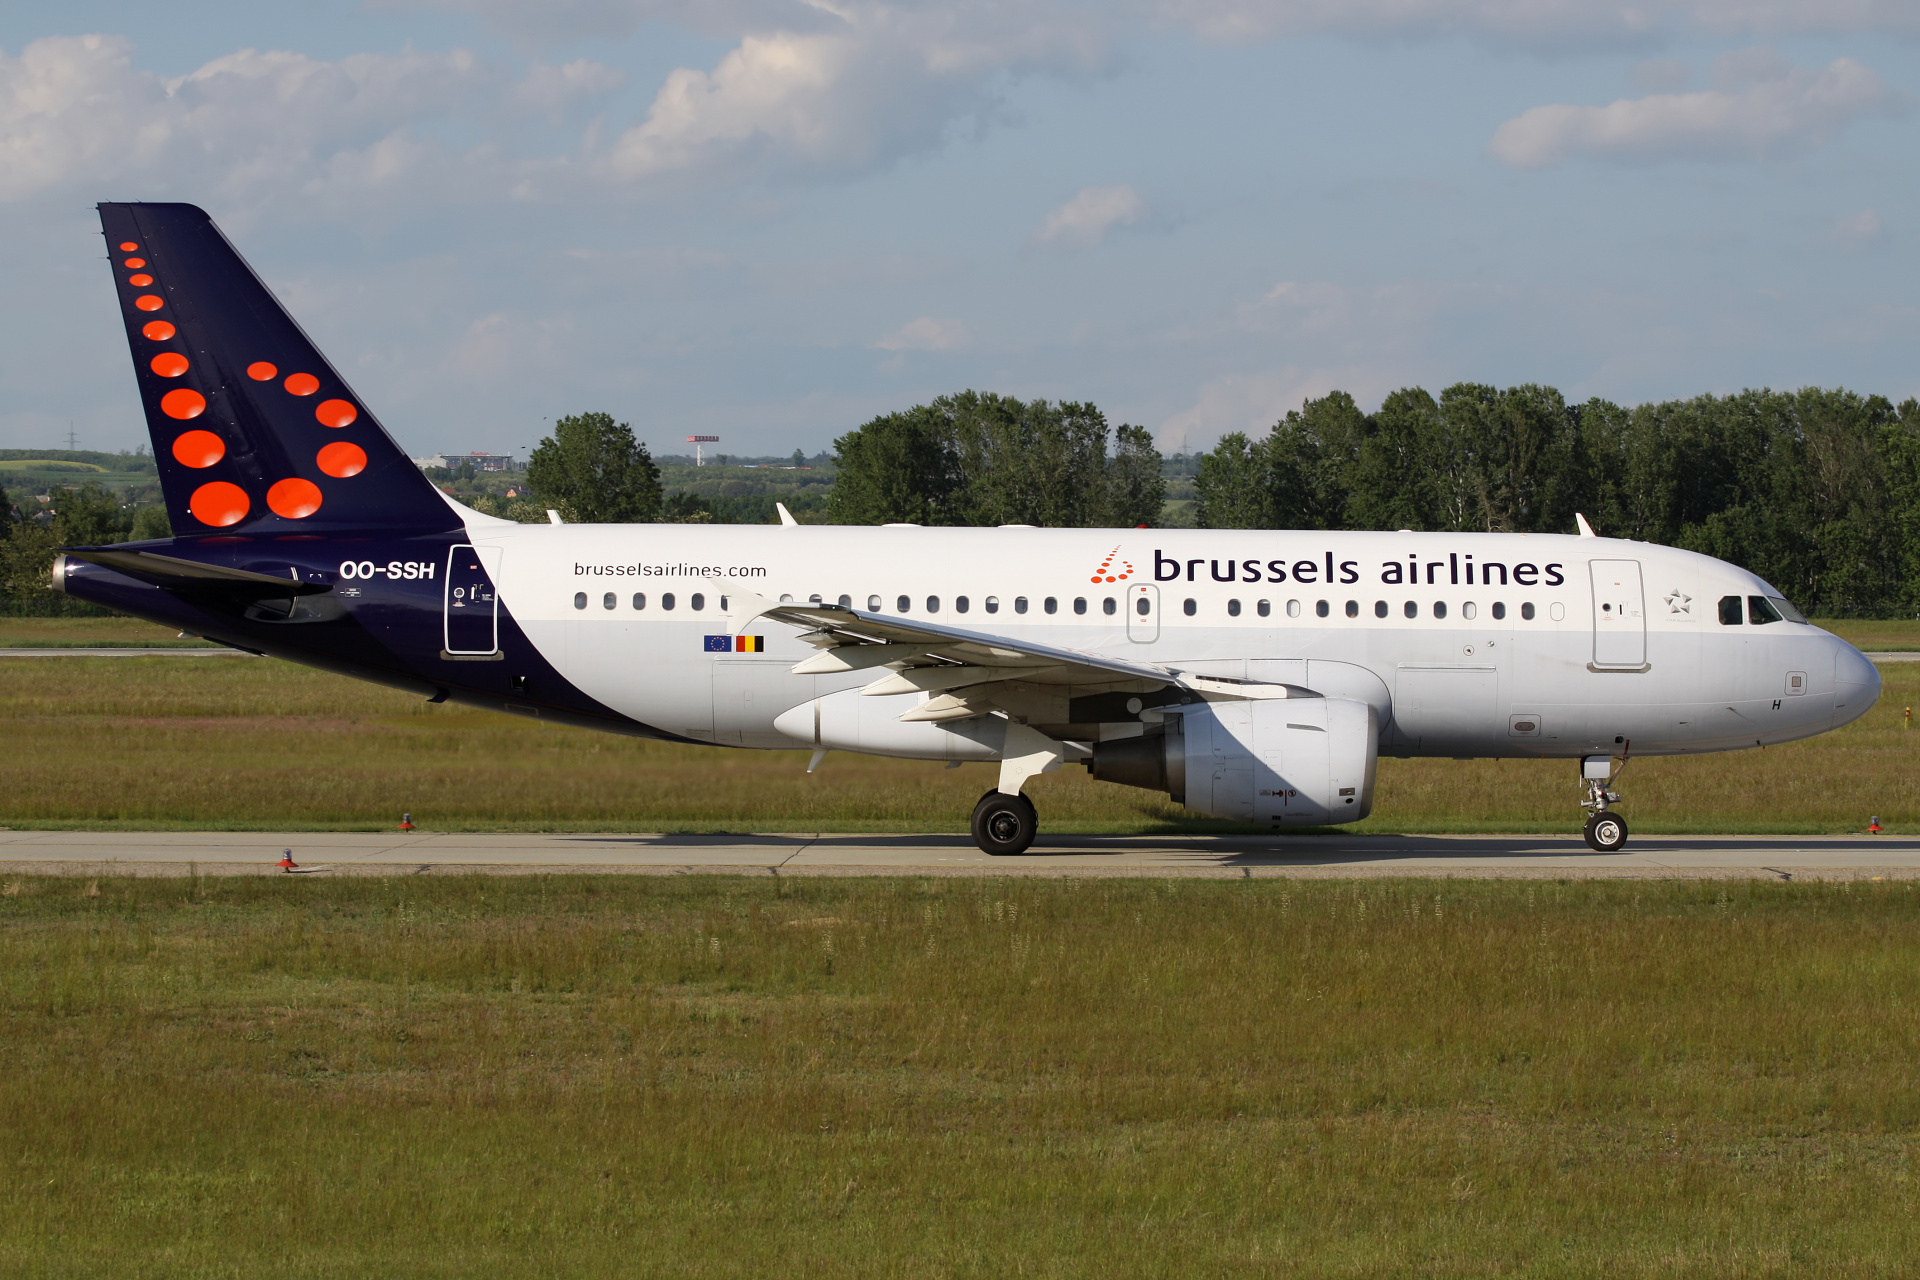 OO-SSH, Brussels Airlines (Aircraft » Ferihegy Spotting » Airbus A319-100)